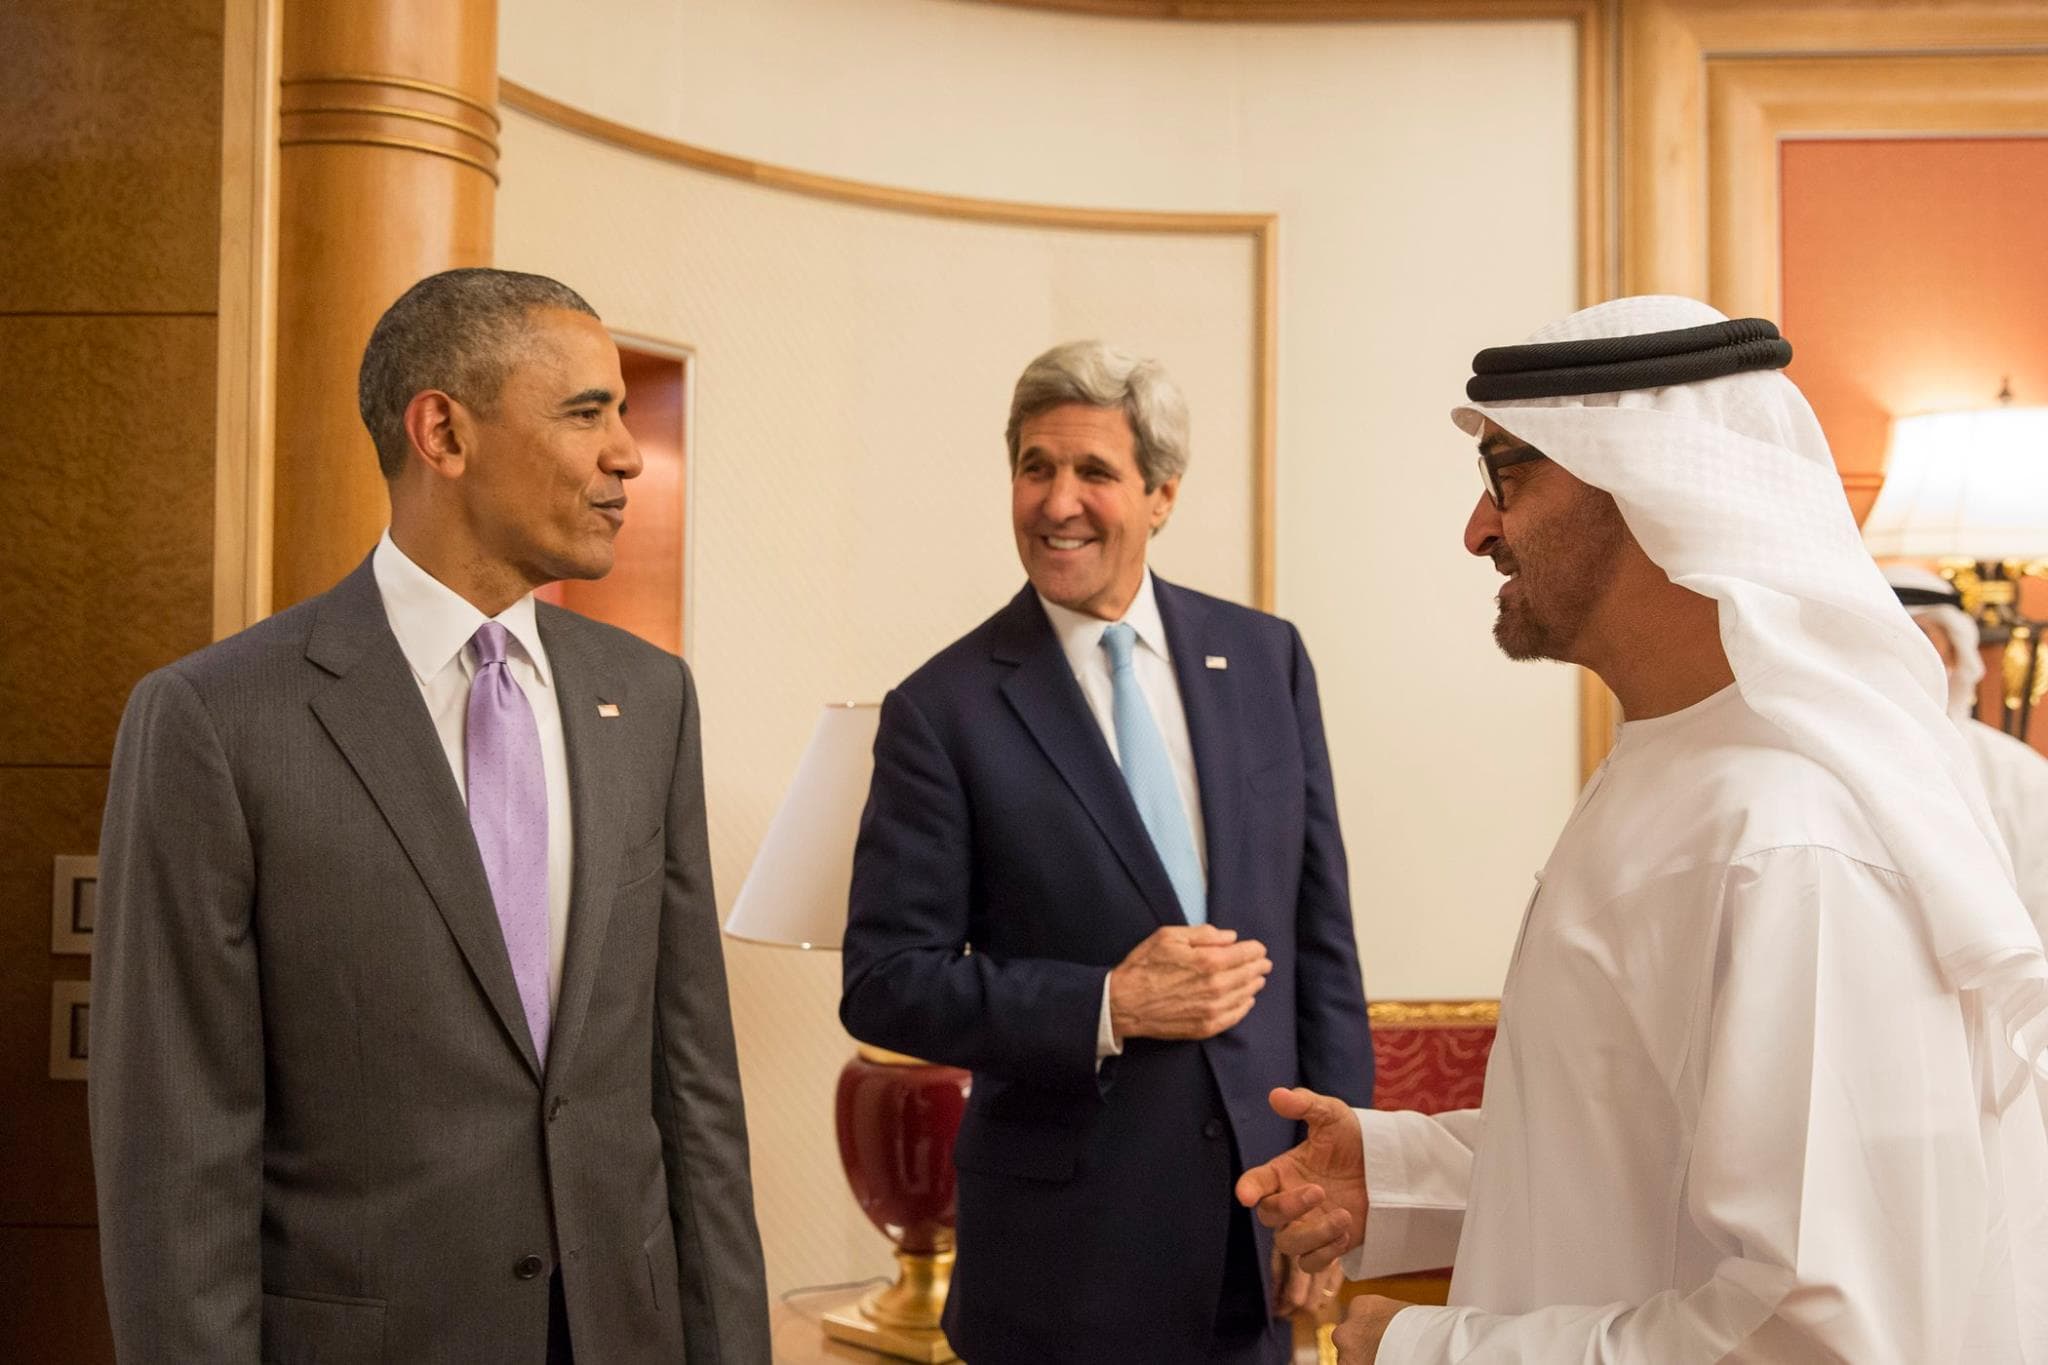 His Highness Sheikh Mohamed bin Zayed Al Nahyan, Crown Prince of Abu Dhabi and Deputy Supreme Commander of the UAE Armed Forces meets with United States President Barack Obama and Secretary of State John Kerry in Riyadh Saudi Arabia - April, 2016